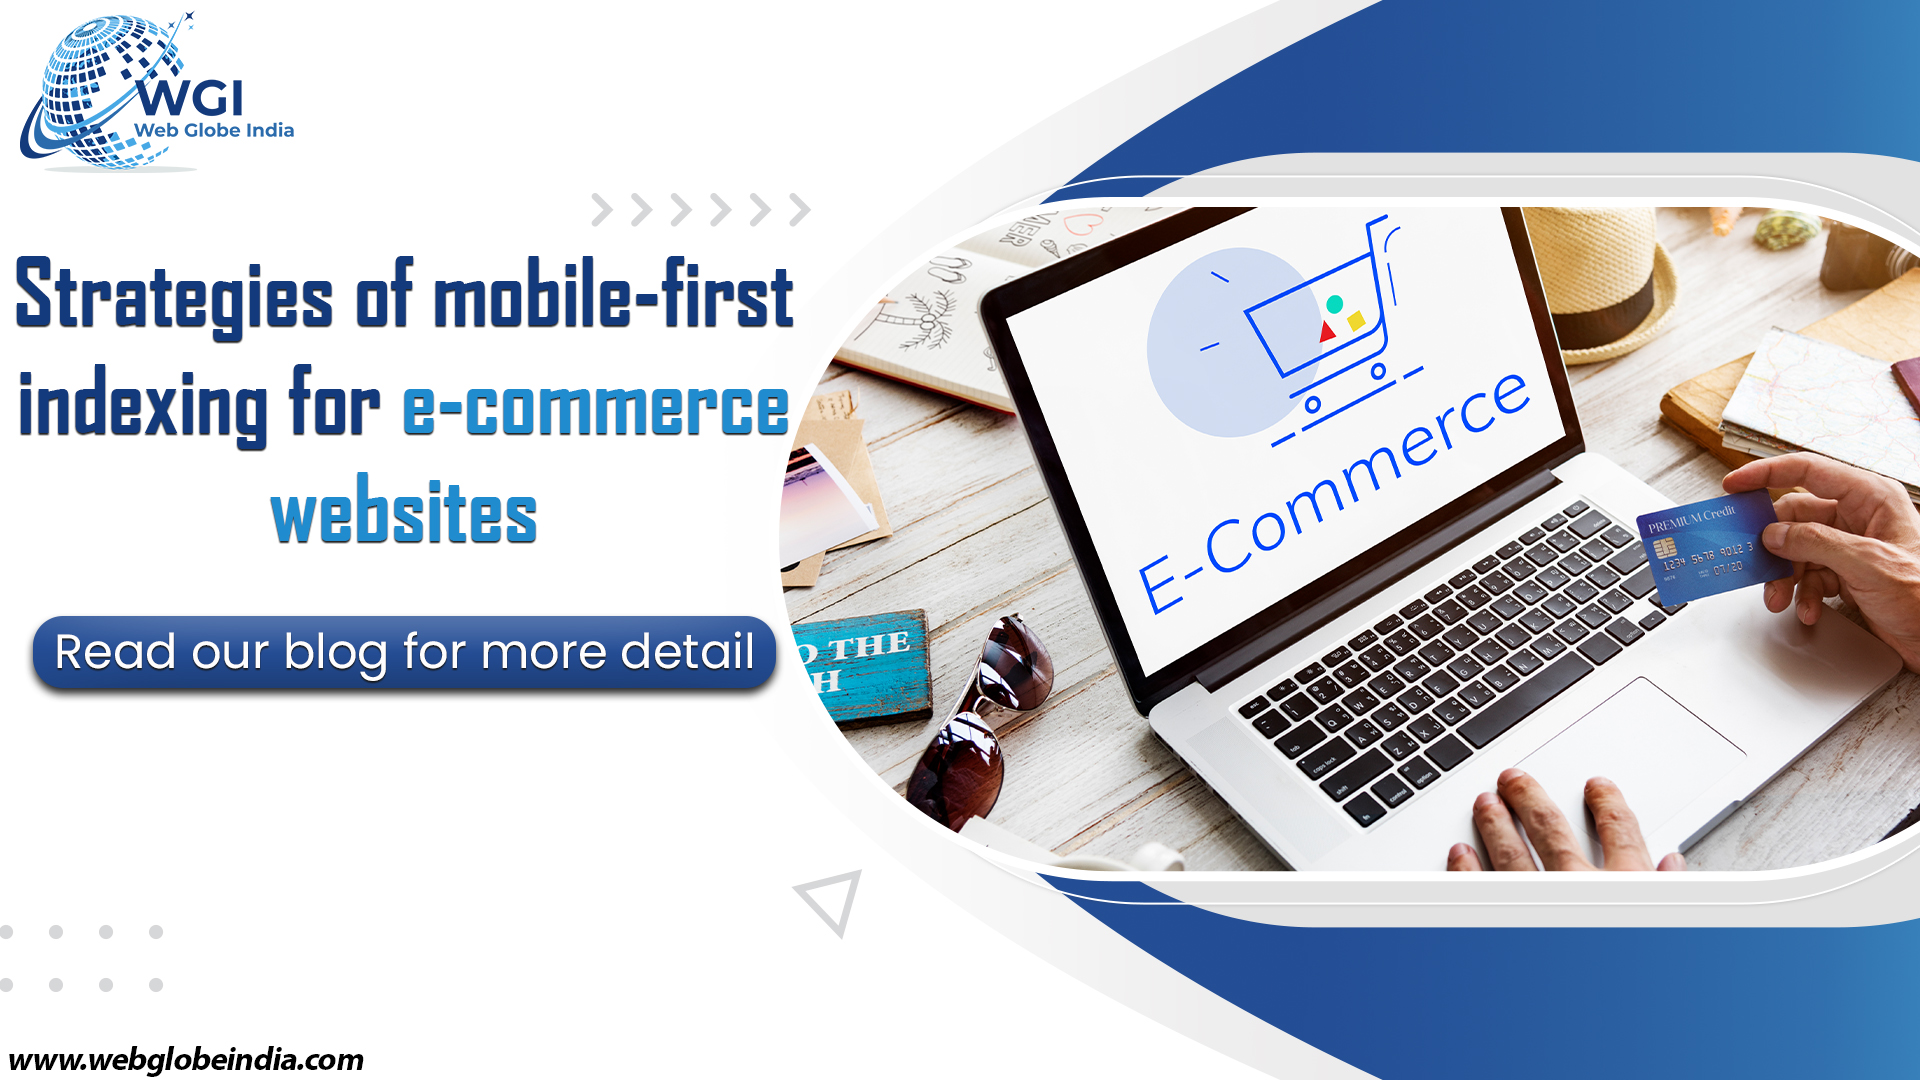 Strategies of mobile-first indexing for e-commerce websites